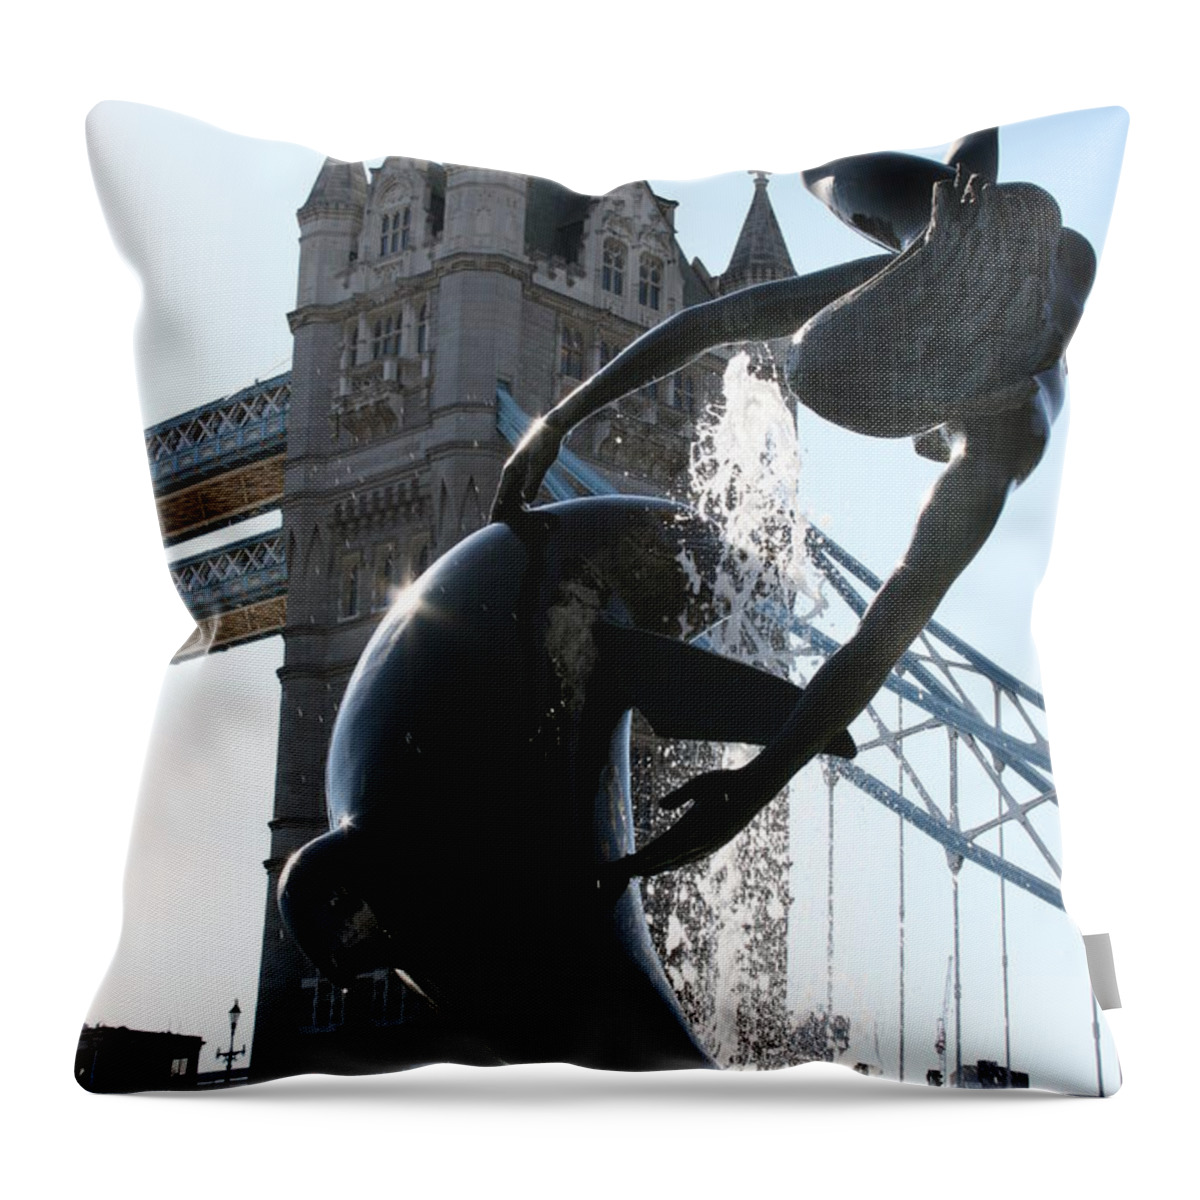 Statue Throw Pillow featuring the photograph DG by MGhany